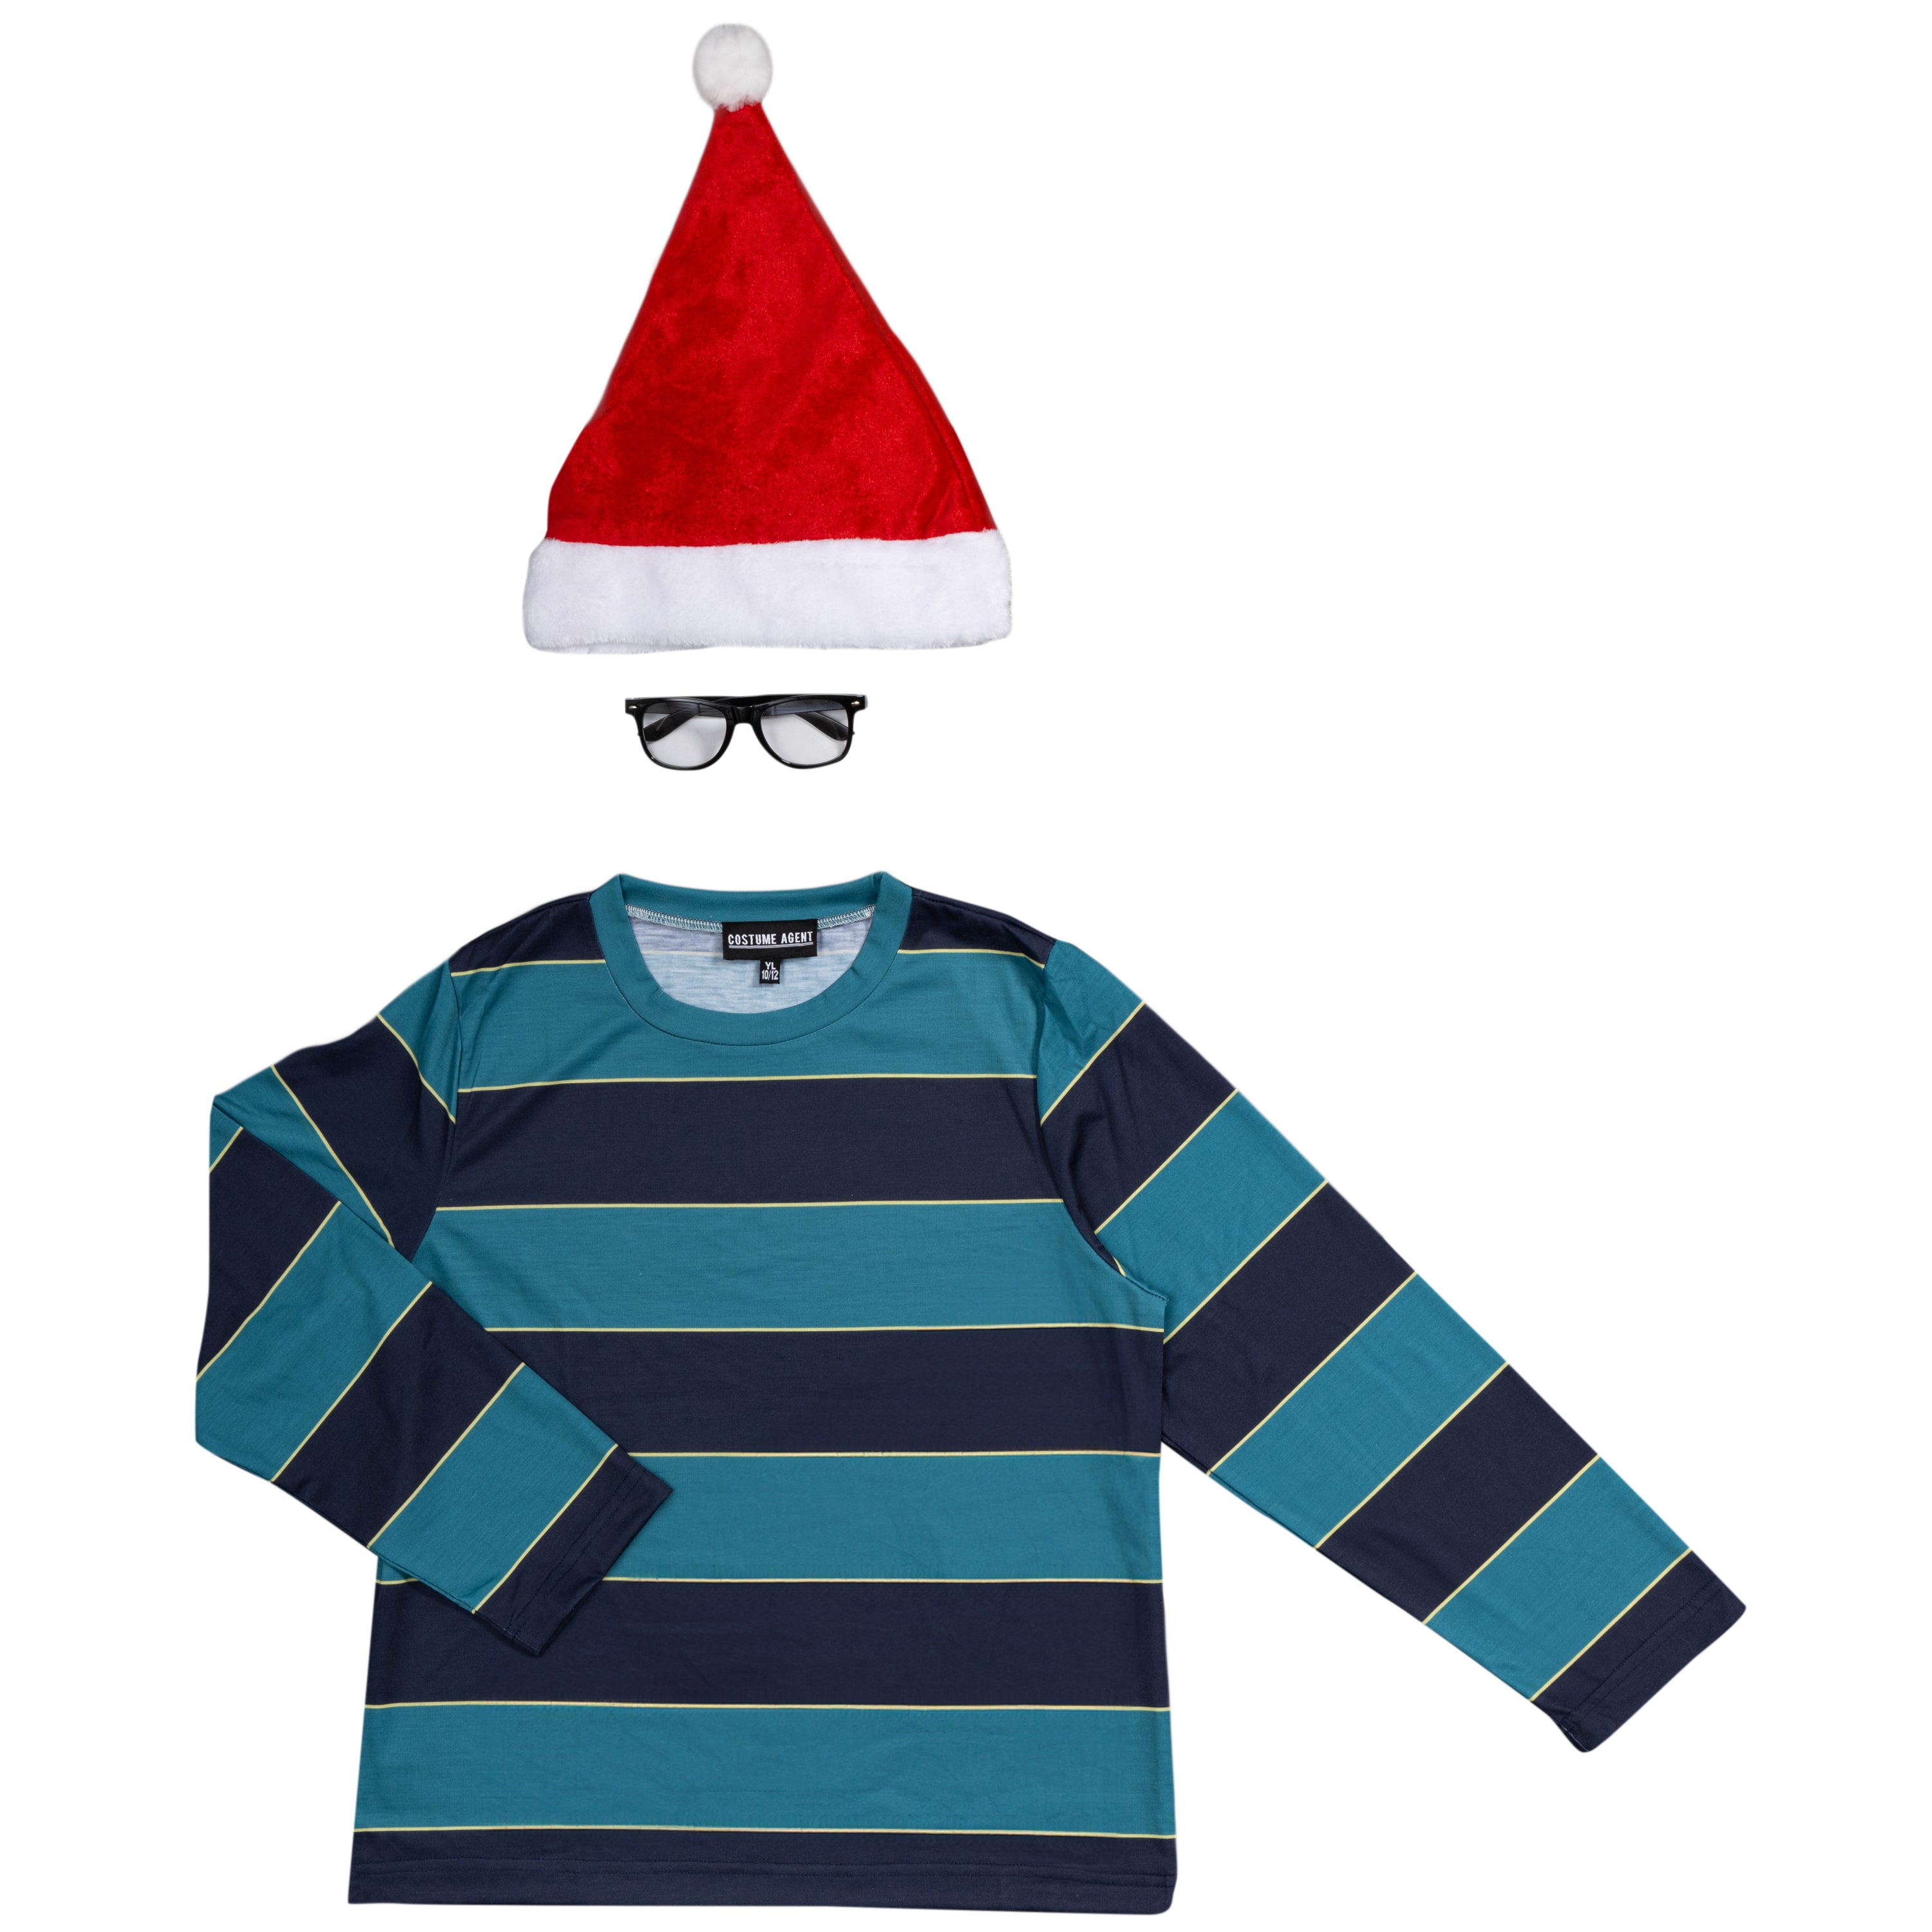 Home Sweet Home Striped Youth Shirt, Santa Hat, Glasses